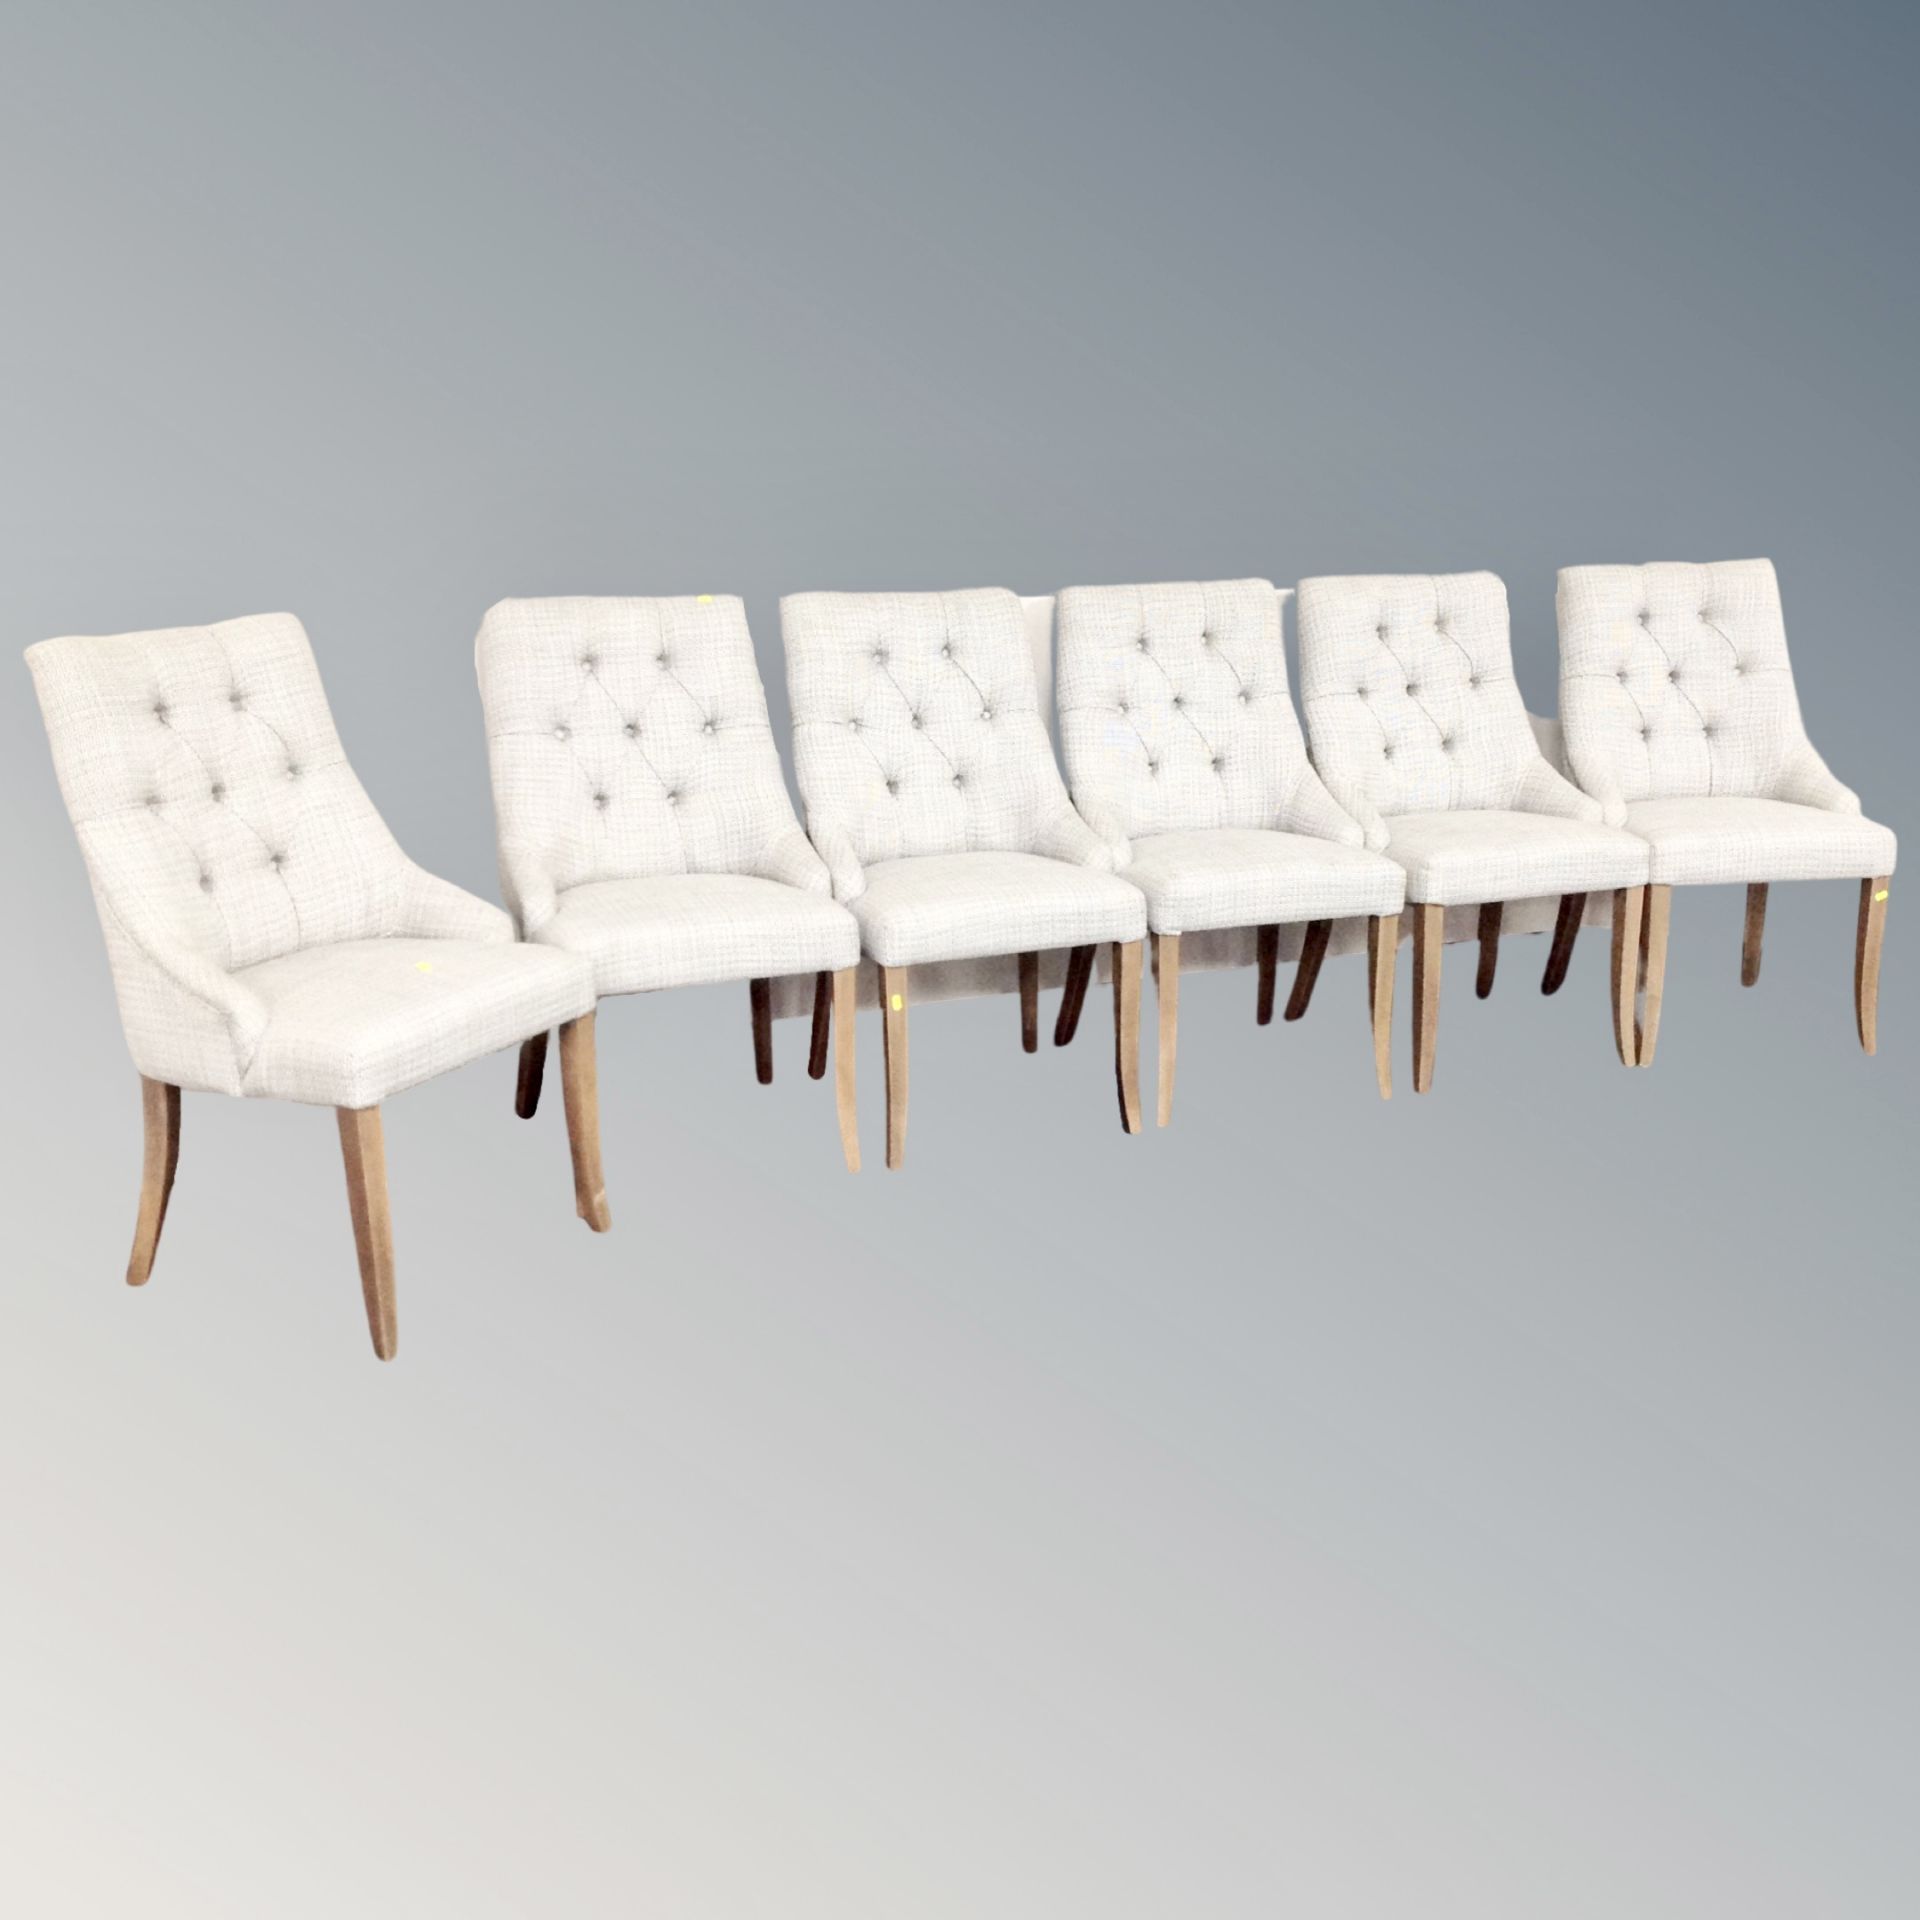 A set of six contemporary dining chairs upholstered in beige buttoned fabric